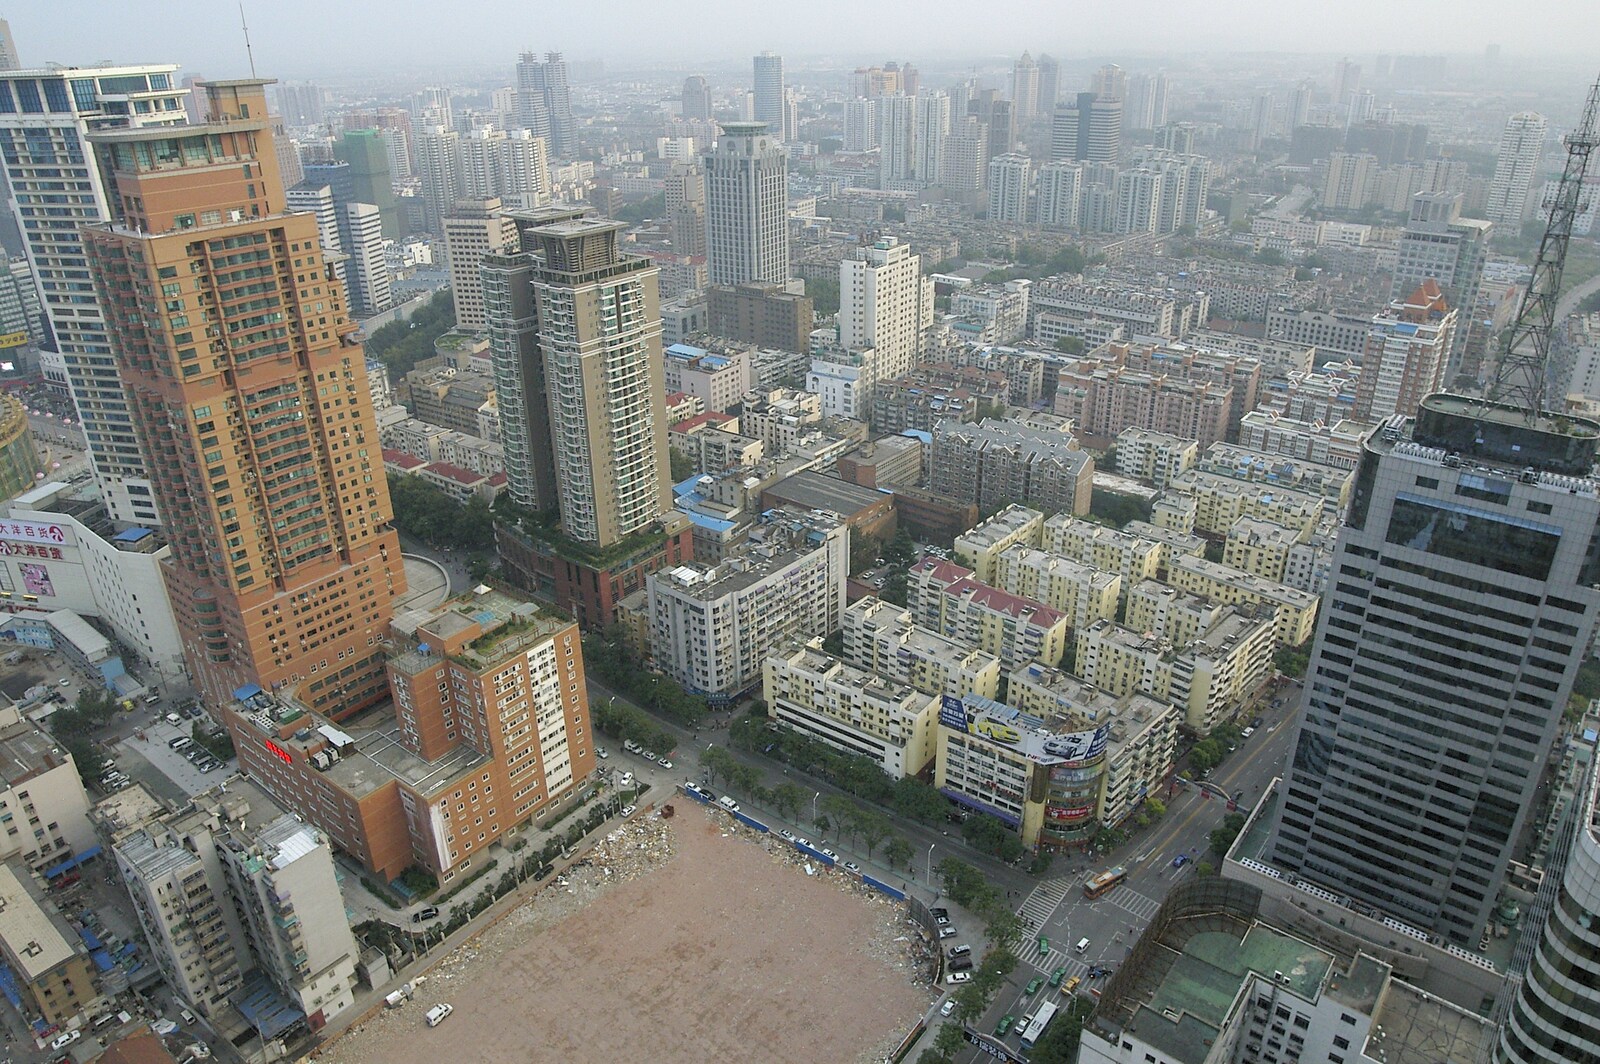 A view of downtown Nanjing from the 46th floor from A Few Days in Nanjing, Jiangsu Province, China - 7th October 2006